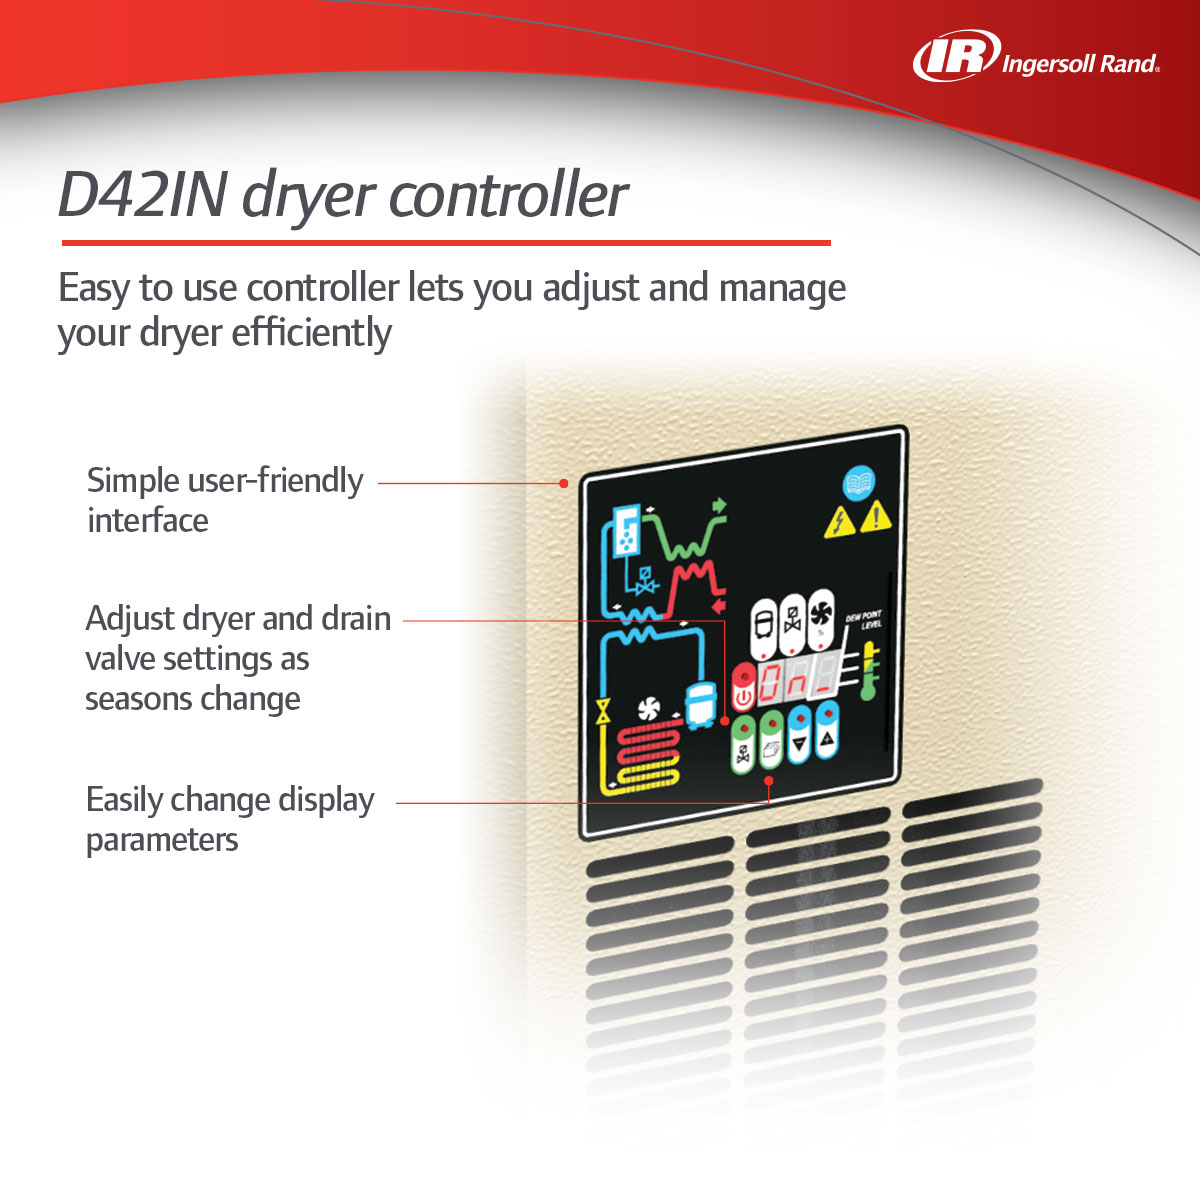 compressed air treatment D42INdryercontroller